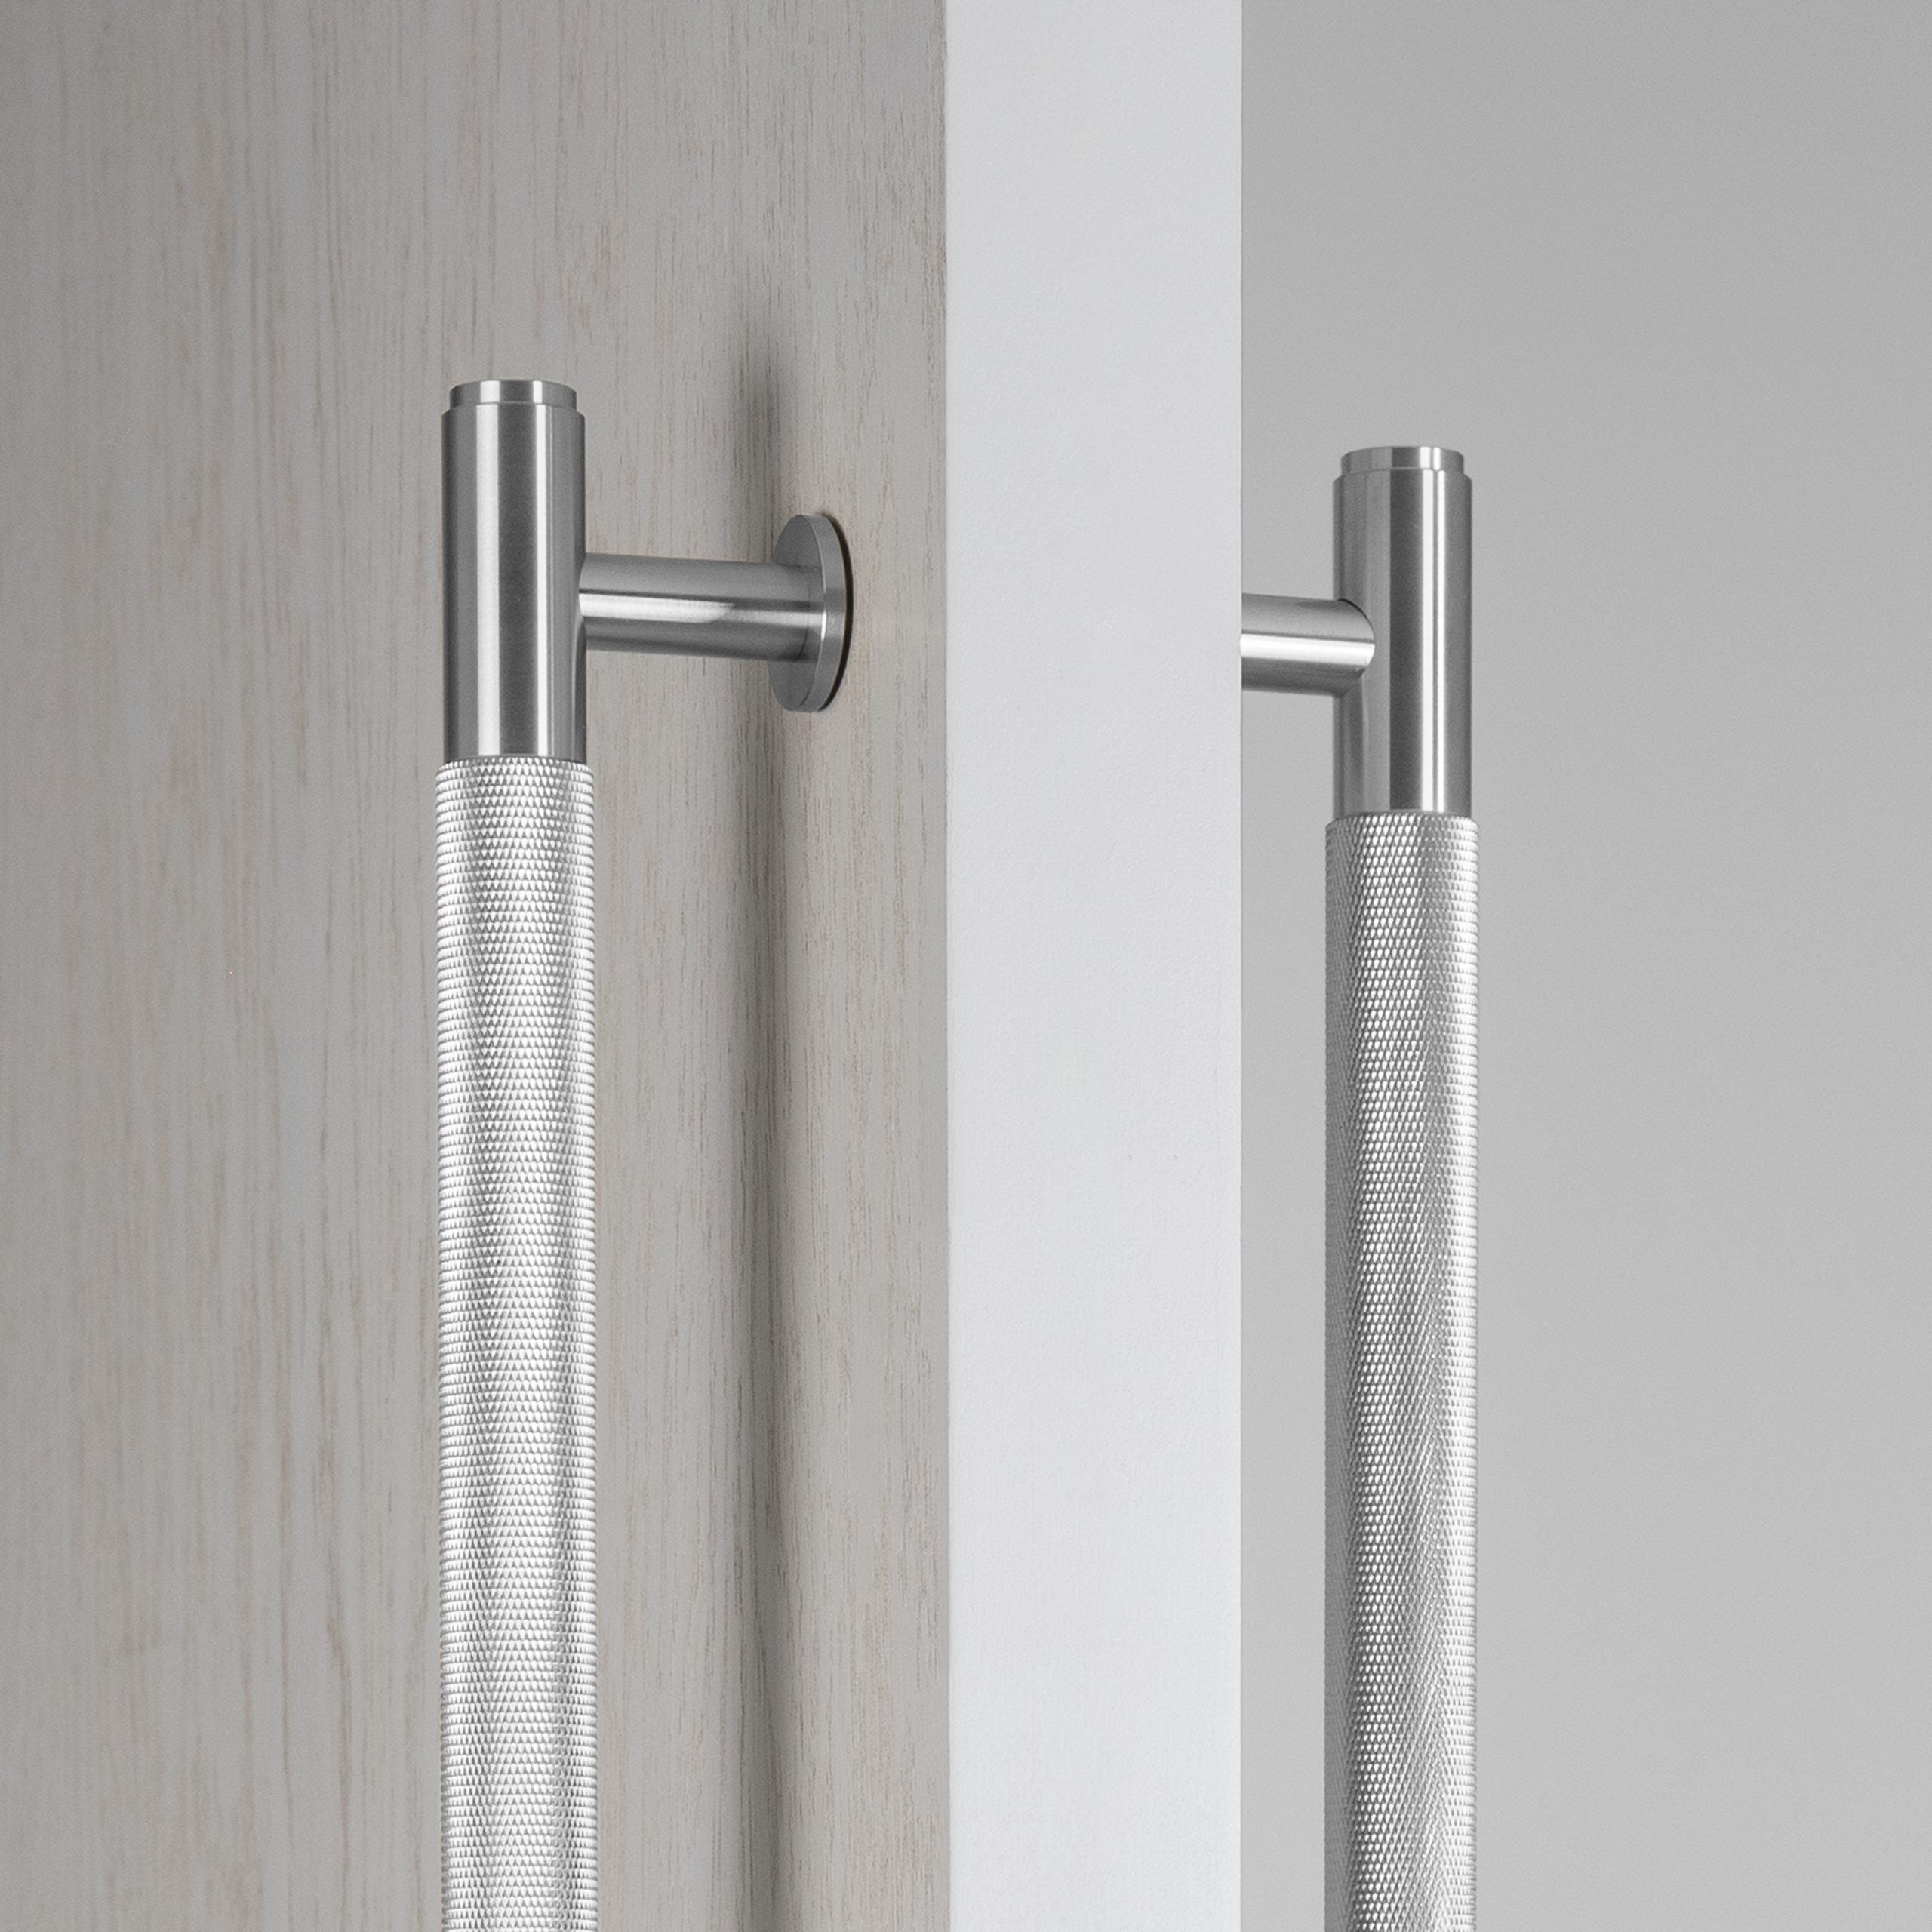 Buster + Punch 30.5 inch Double-sided Cross Knurl Closet Bar Hardware Buster + Punch   